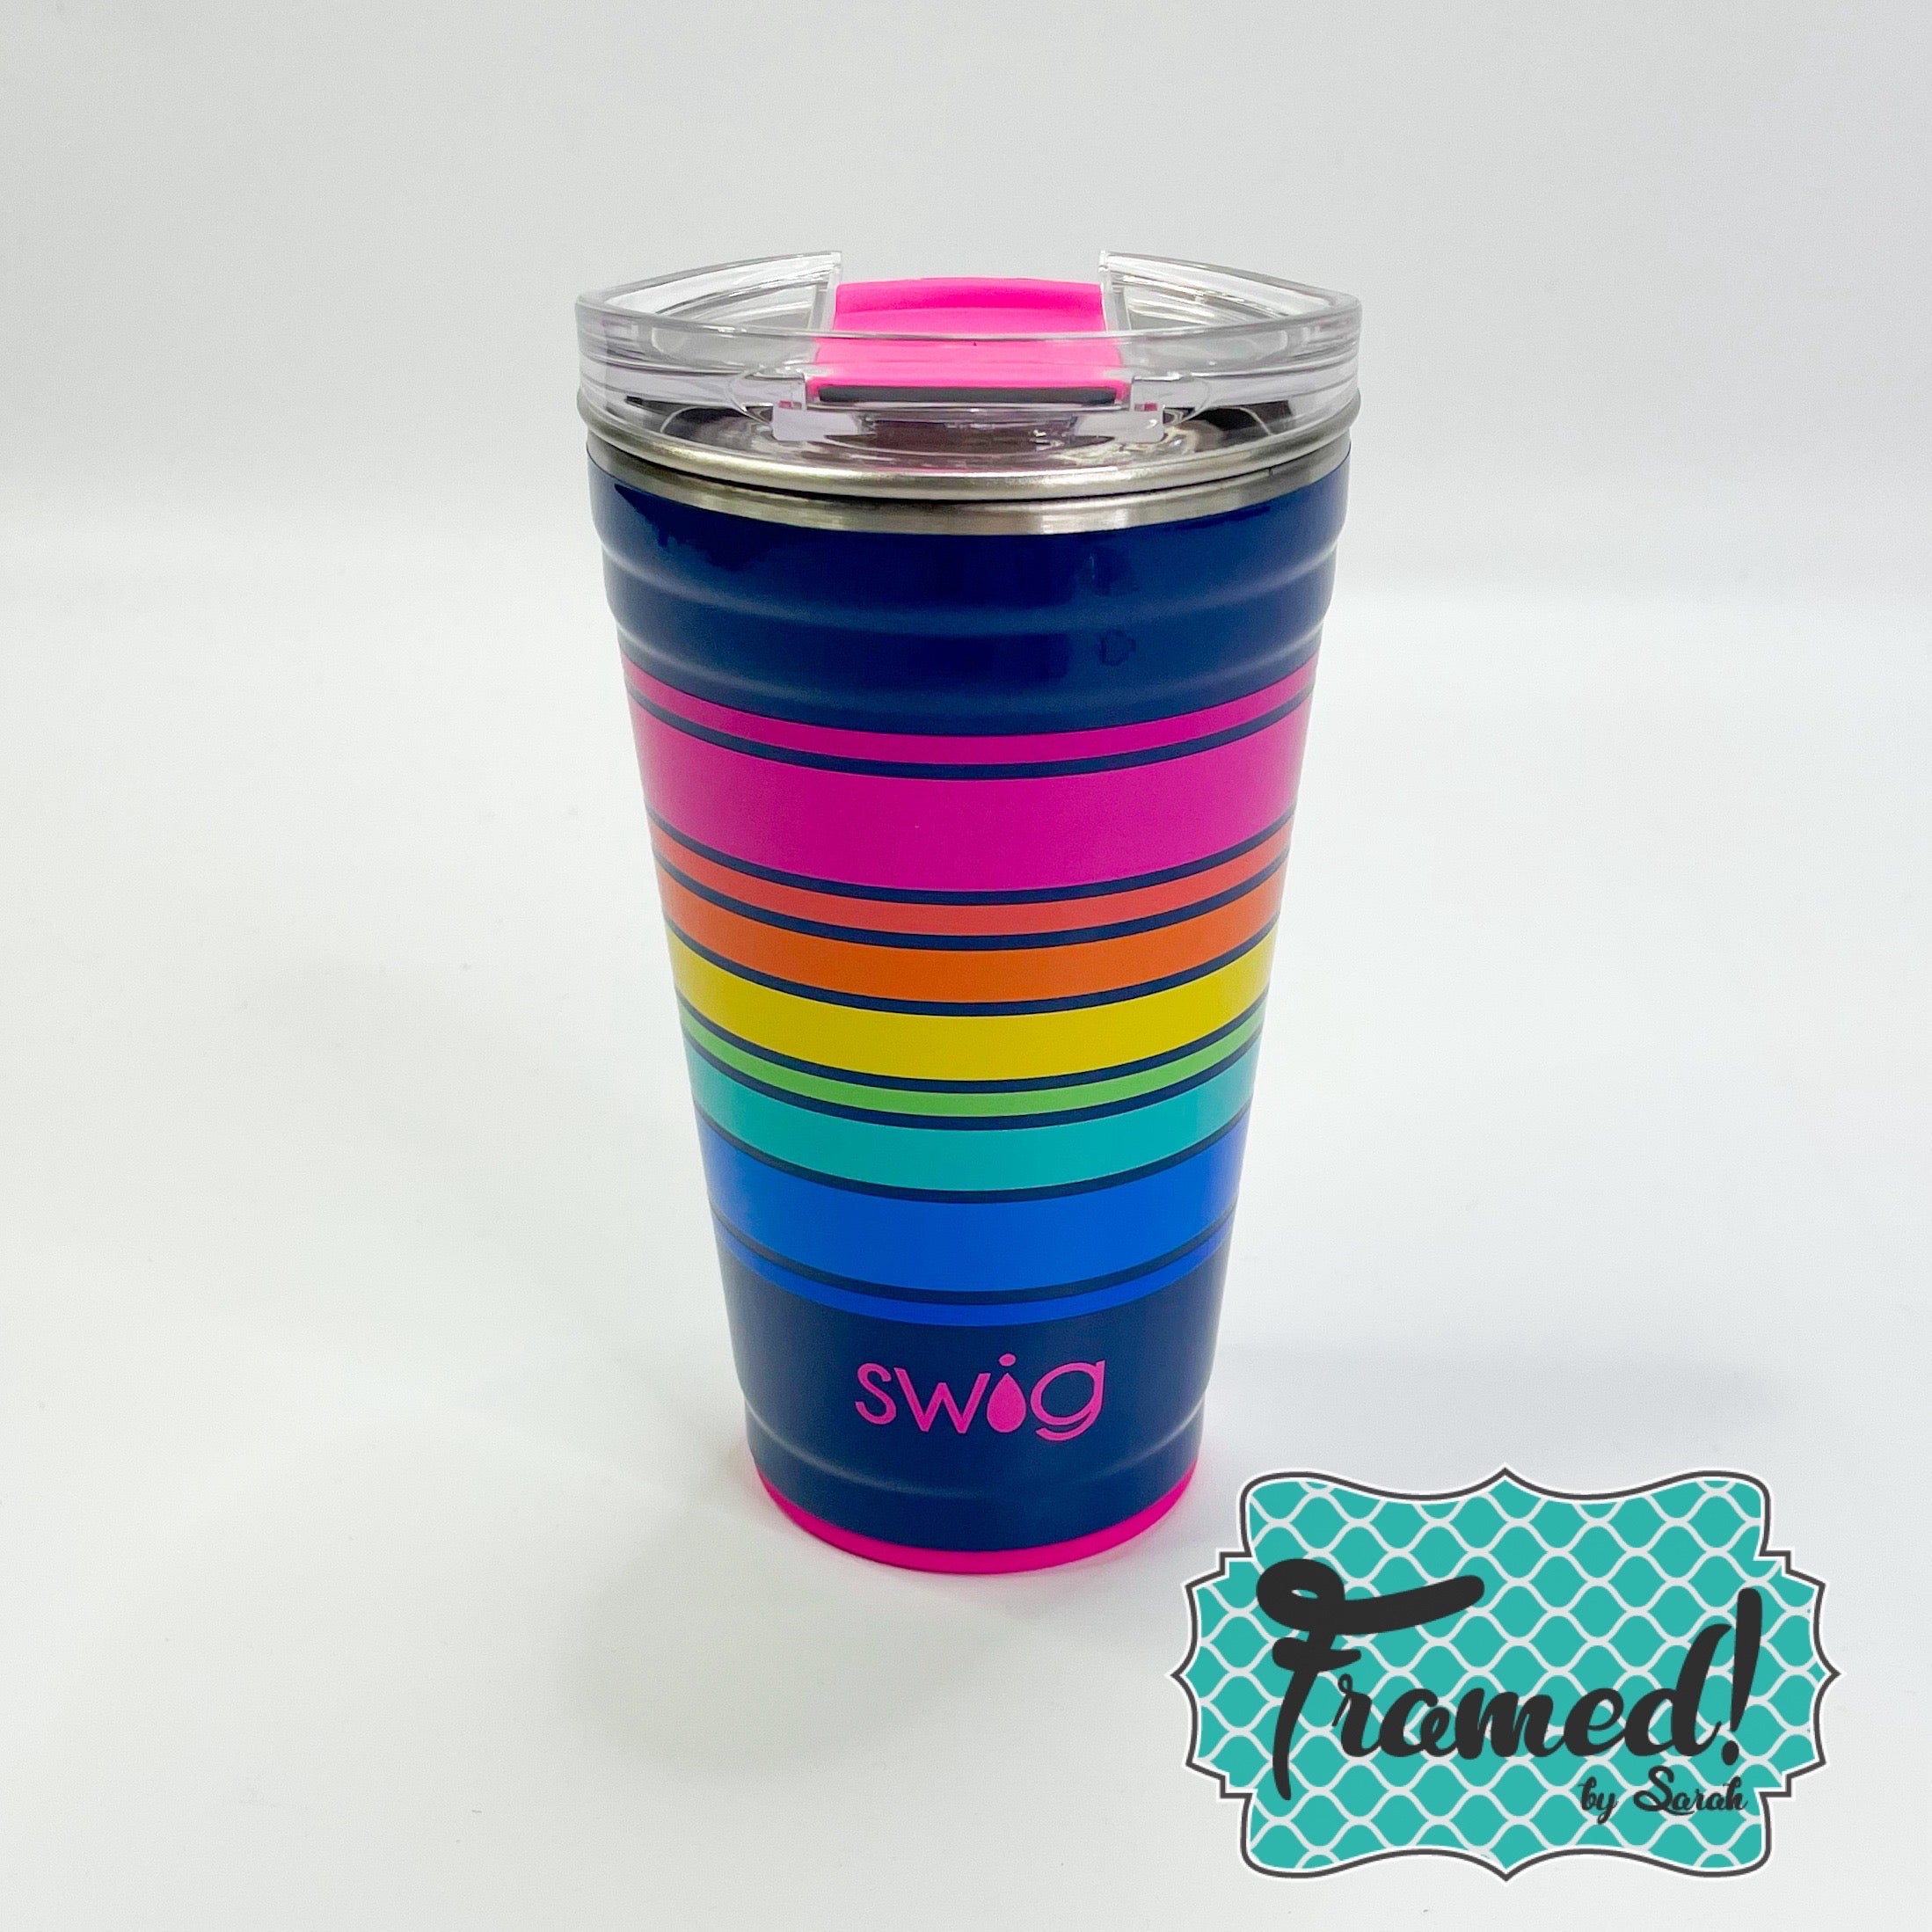 24 oz Swig Electric Slide Party Cup